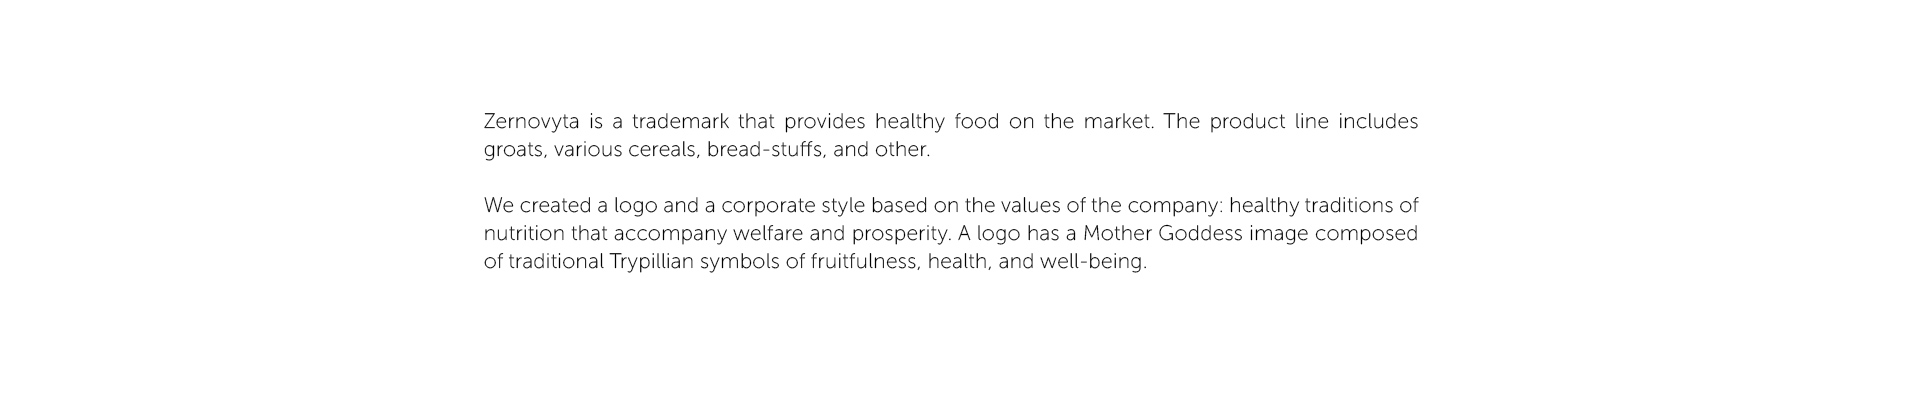 Zernovyta is a trademark that provides healthy food on the market